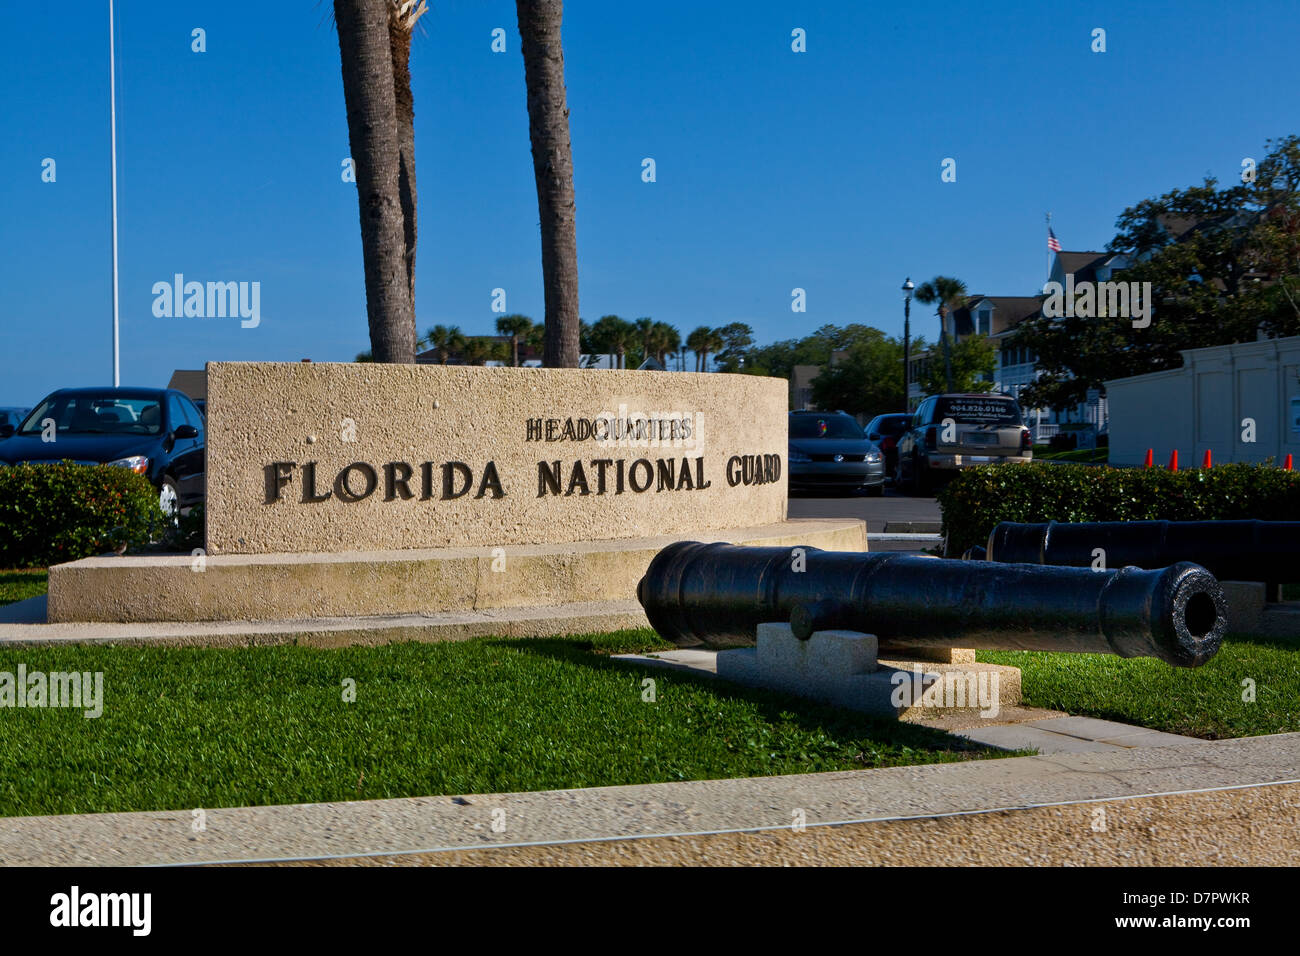 The Florida National guard headquarters is pictured in St. Augustine, Florida Stock Photo